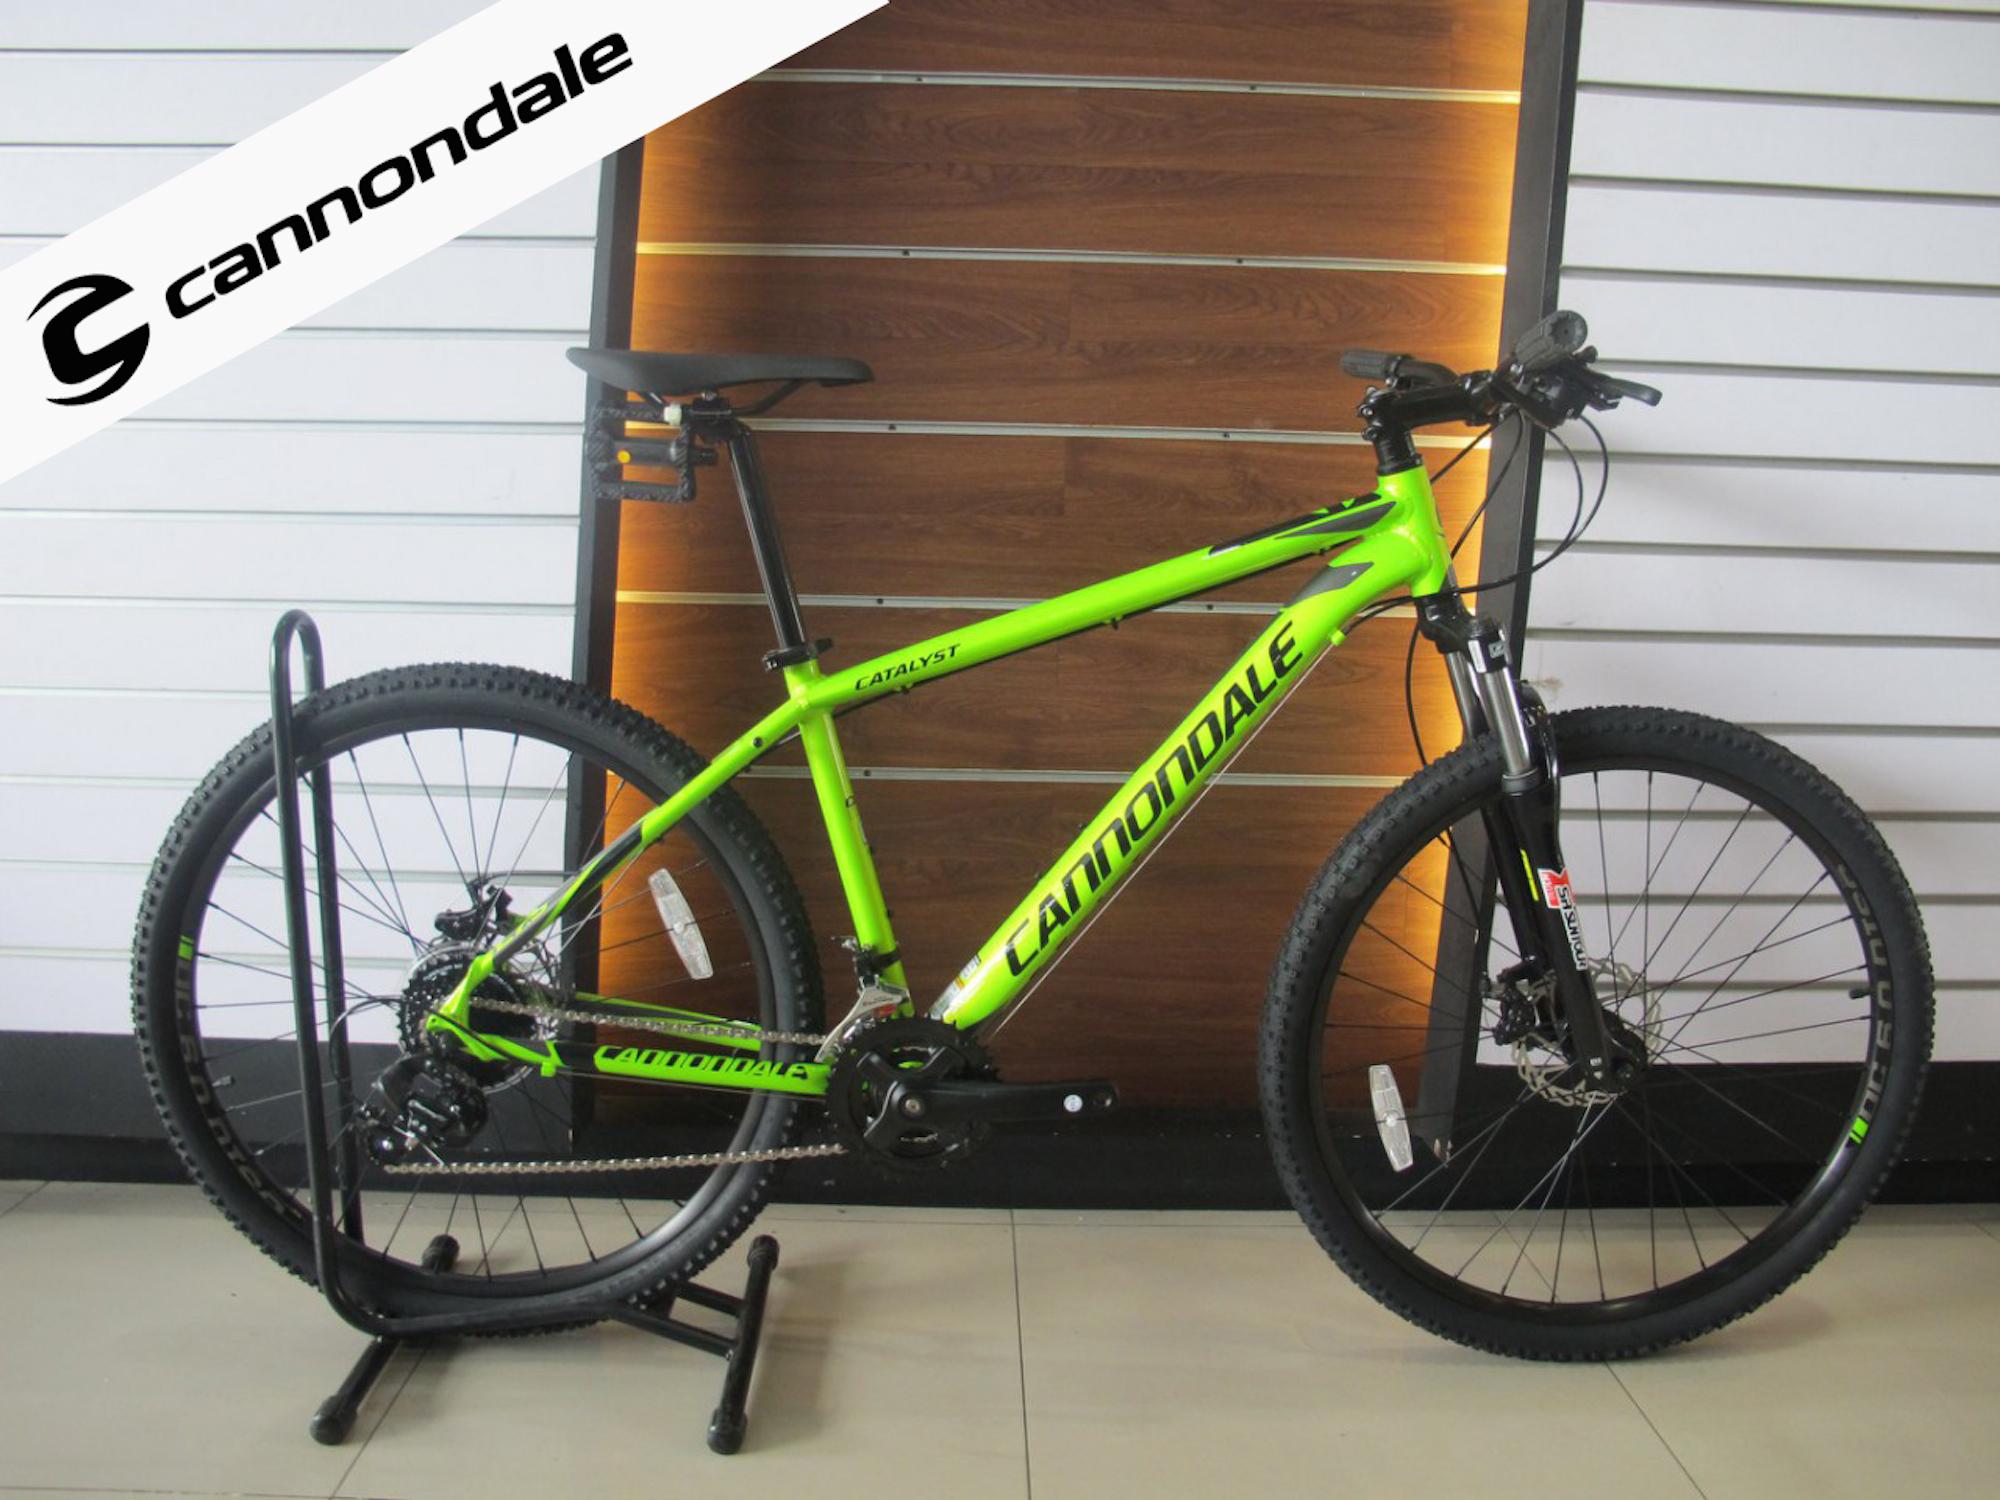 Bewolkt beneden Albany Used Cannondale Mountain Bike Sale, SAVE 51%.